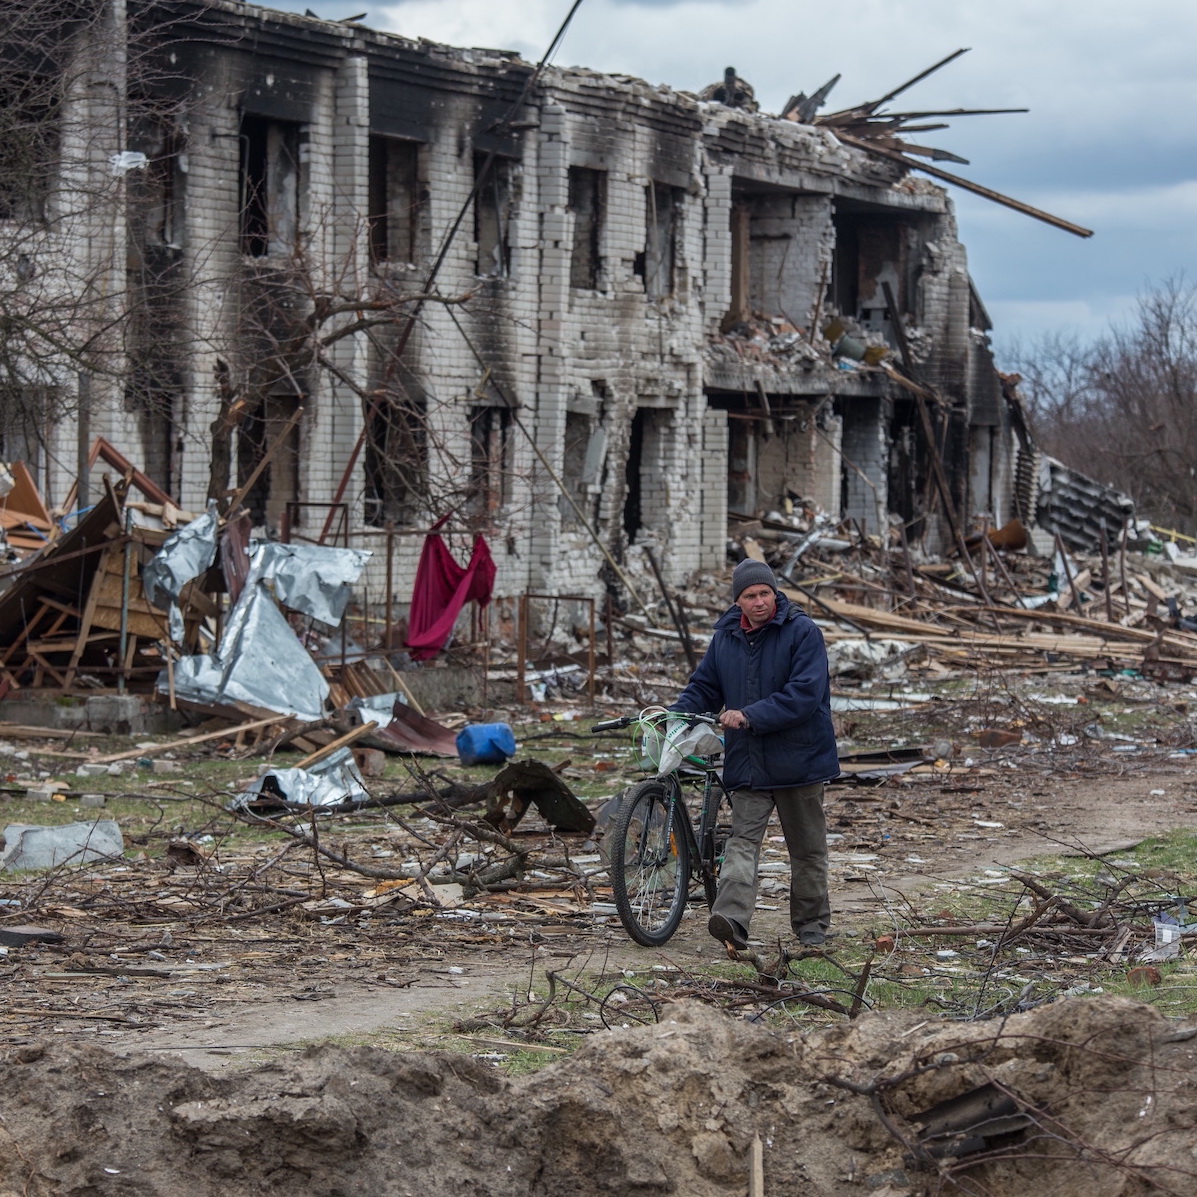 A man in a winter coat and hat pushes his bicycle along a dirt path in front of a bombed out building in Ukraine. Debris and tree branches litter the ground.